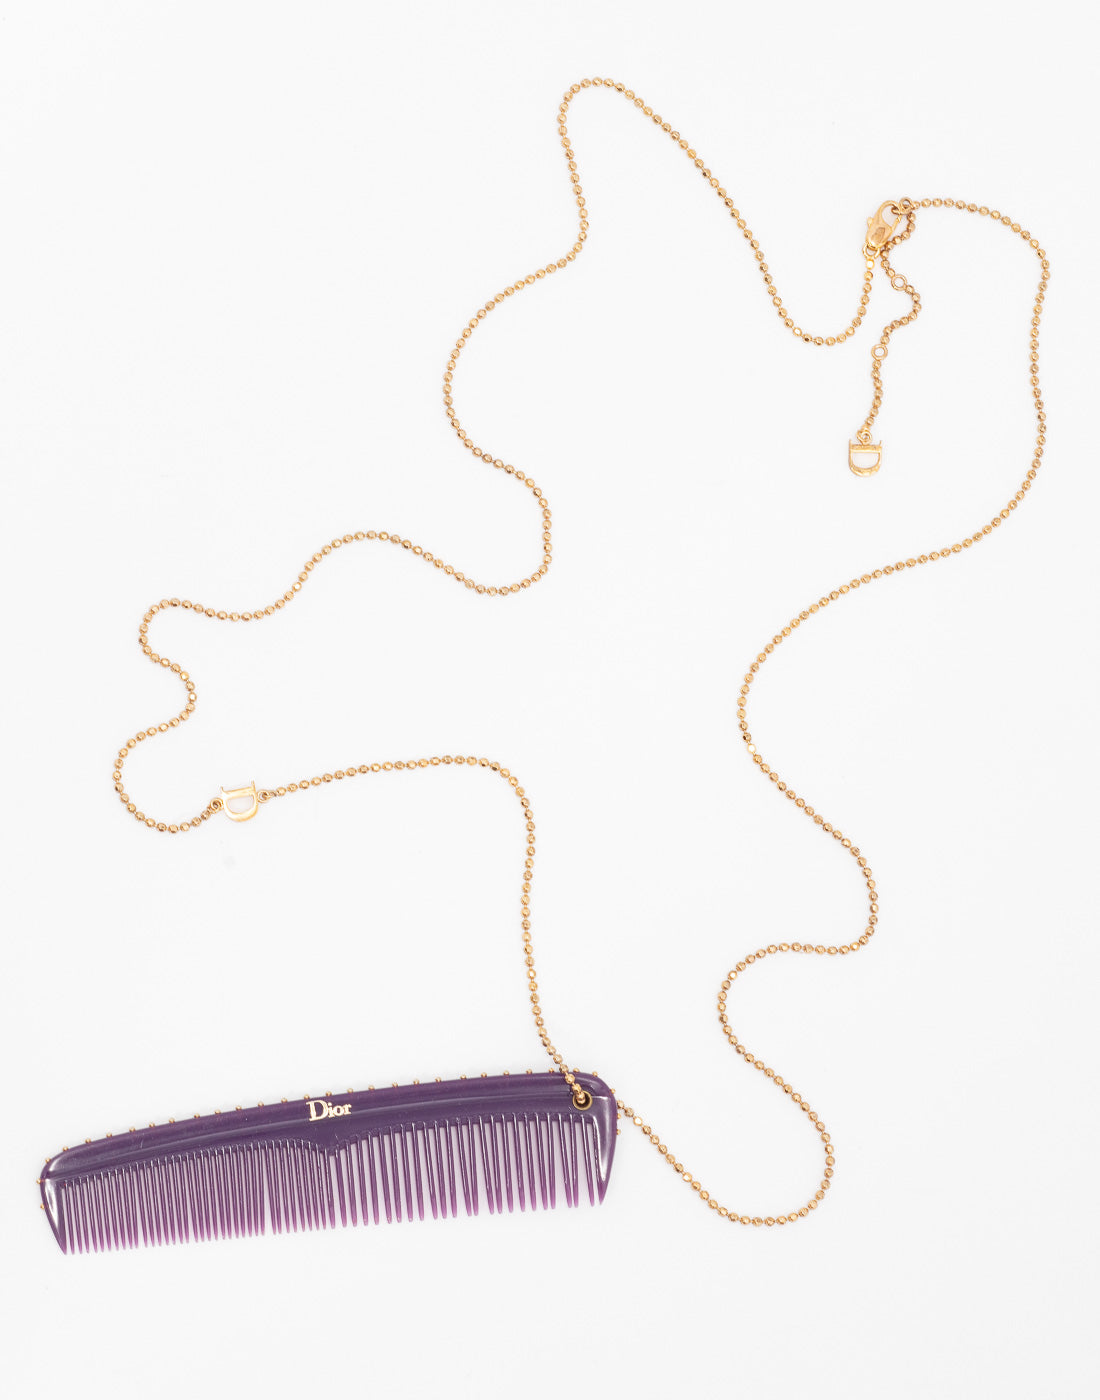 Christian Dior long chain with violet comb